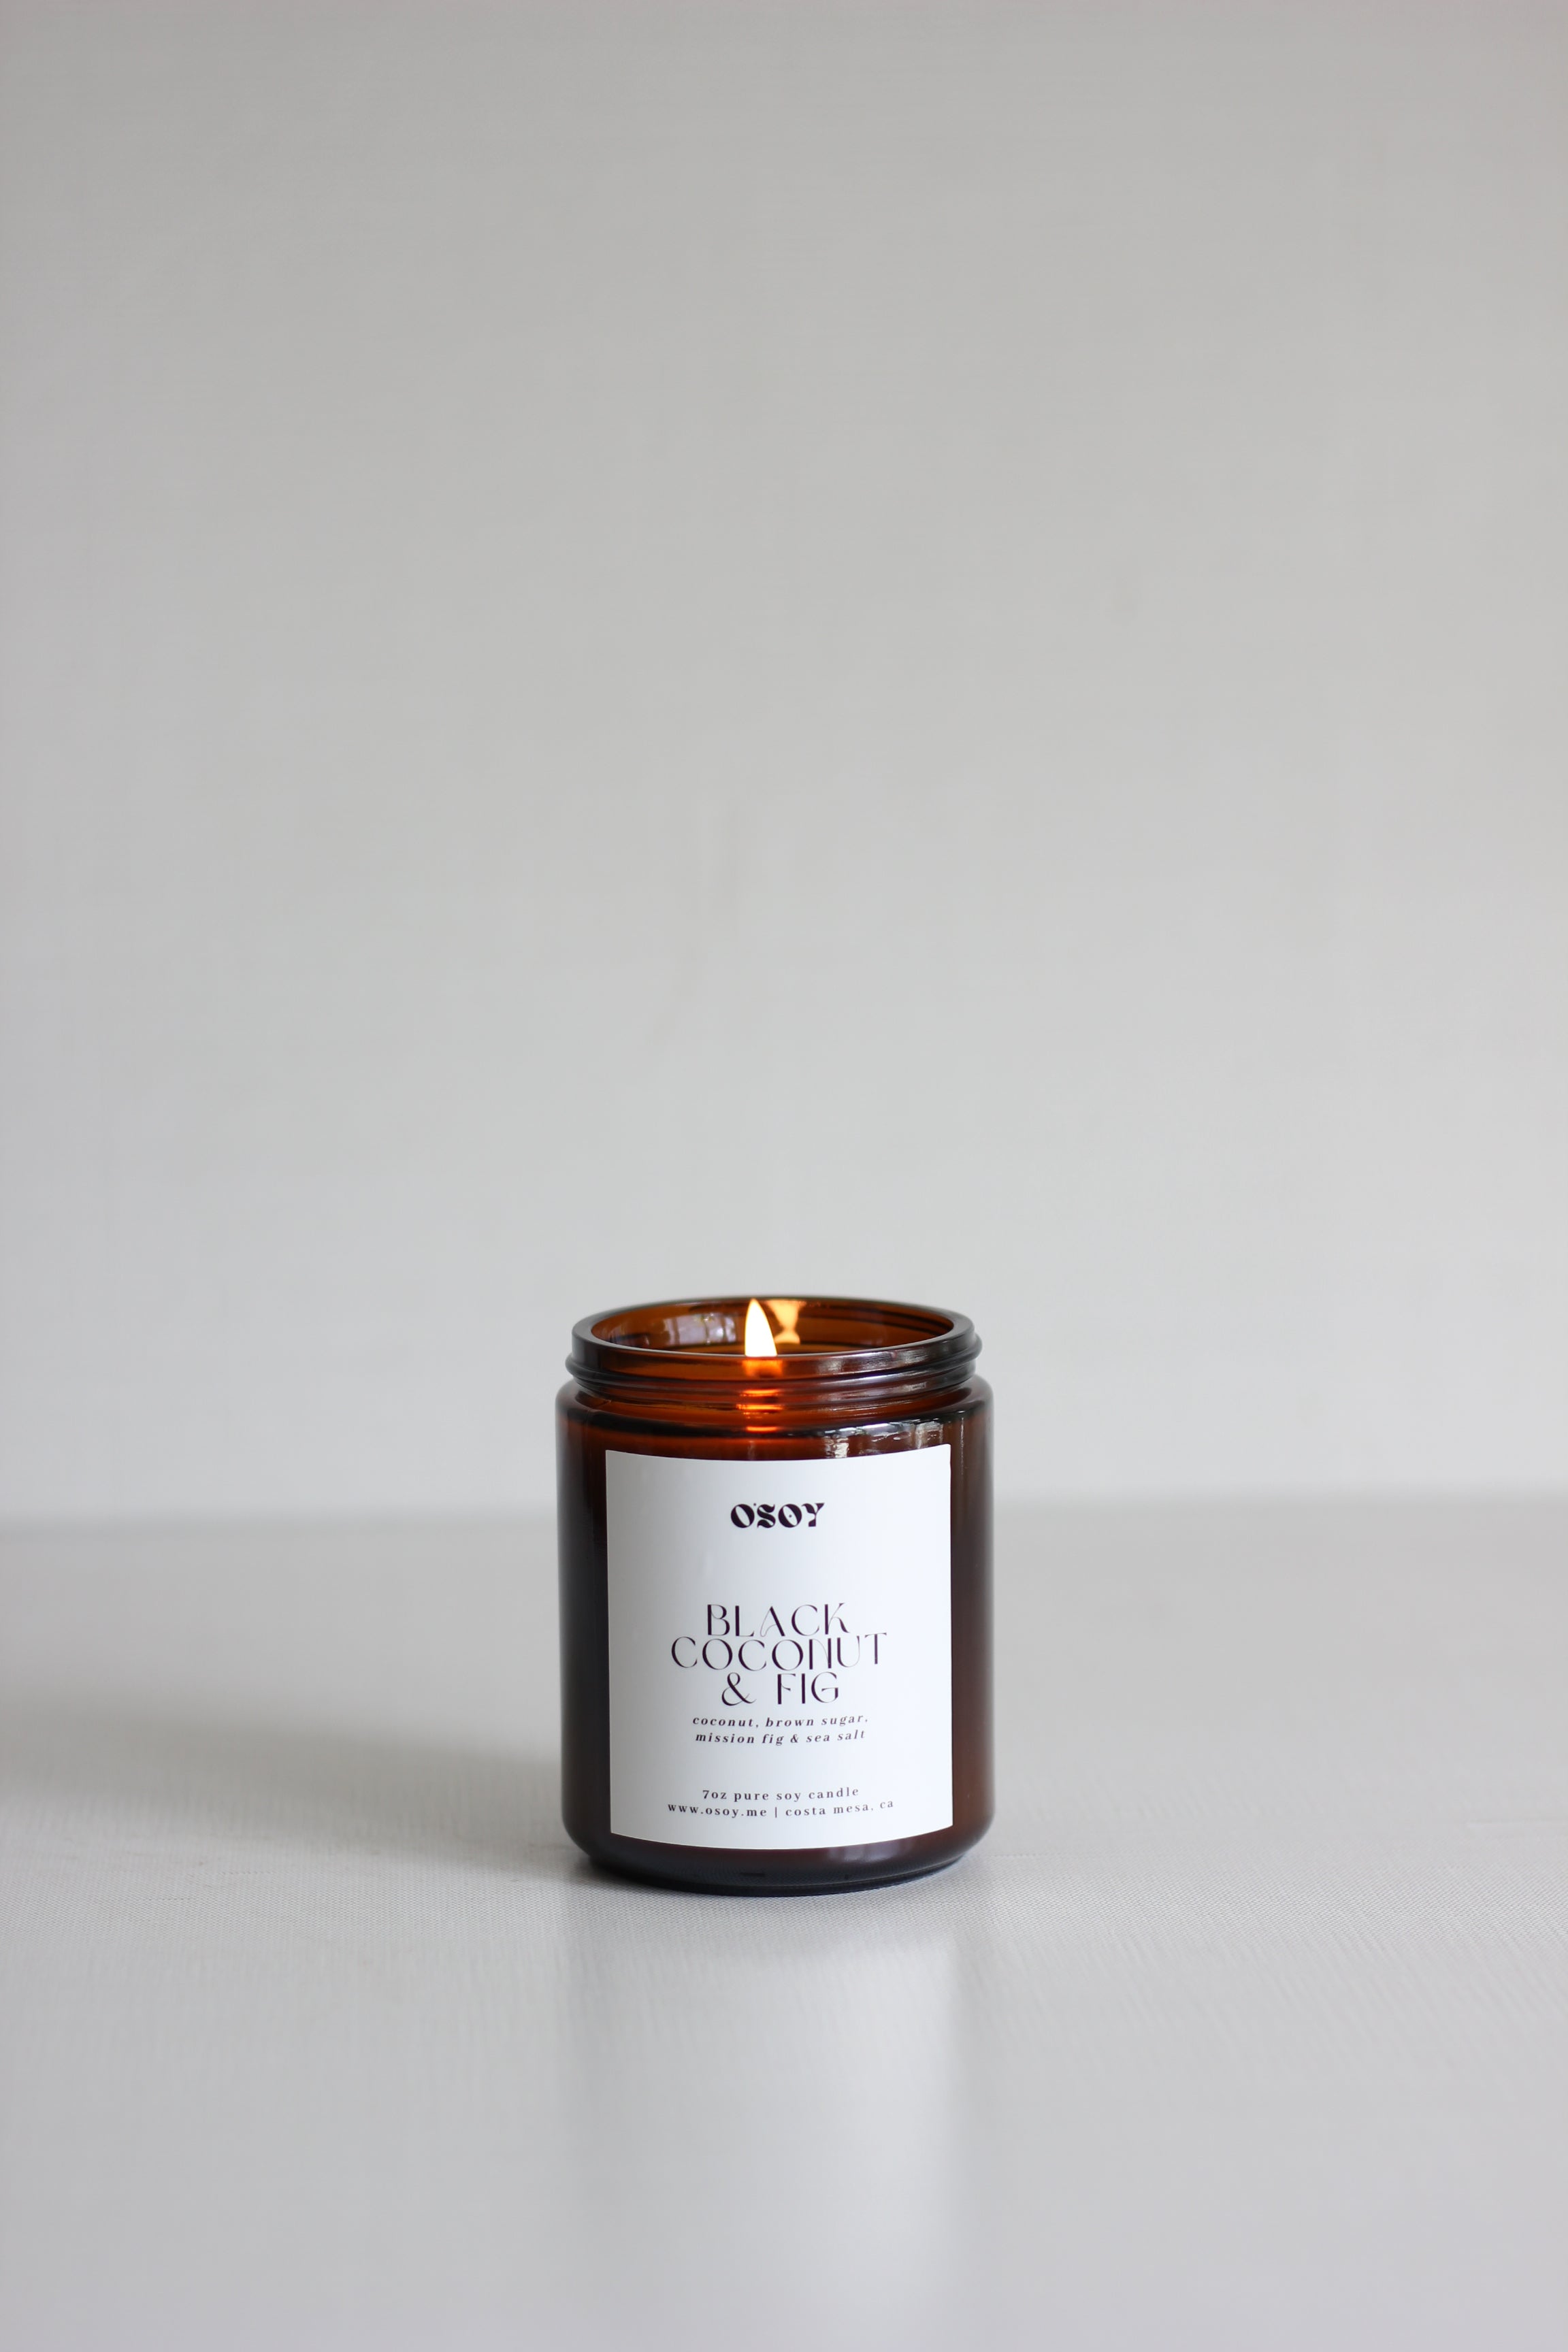 Black Coconut & Fig- 7oz Soy Candle